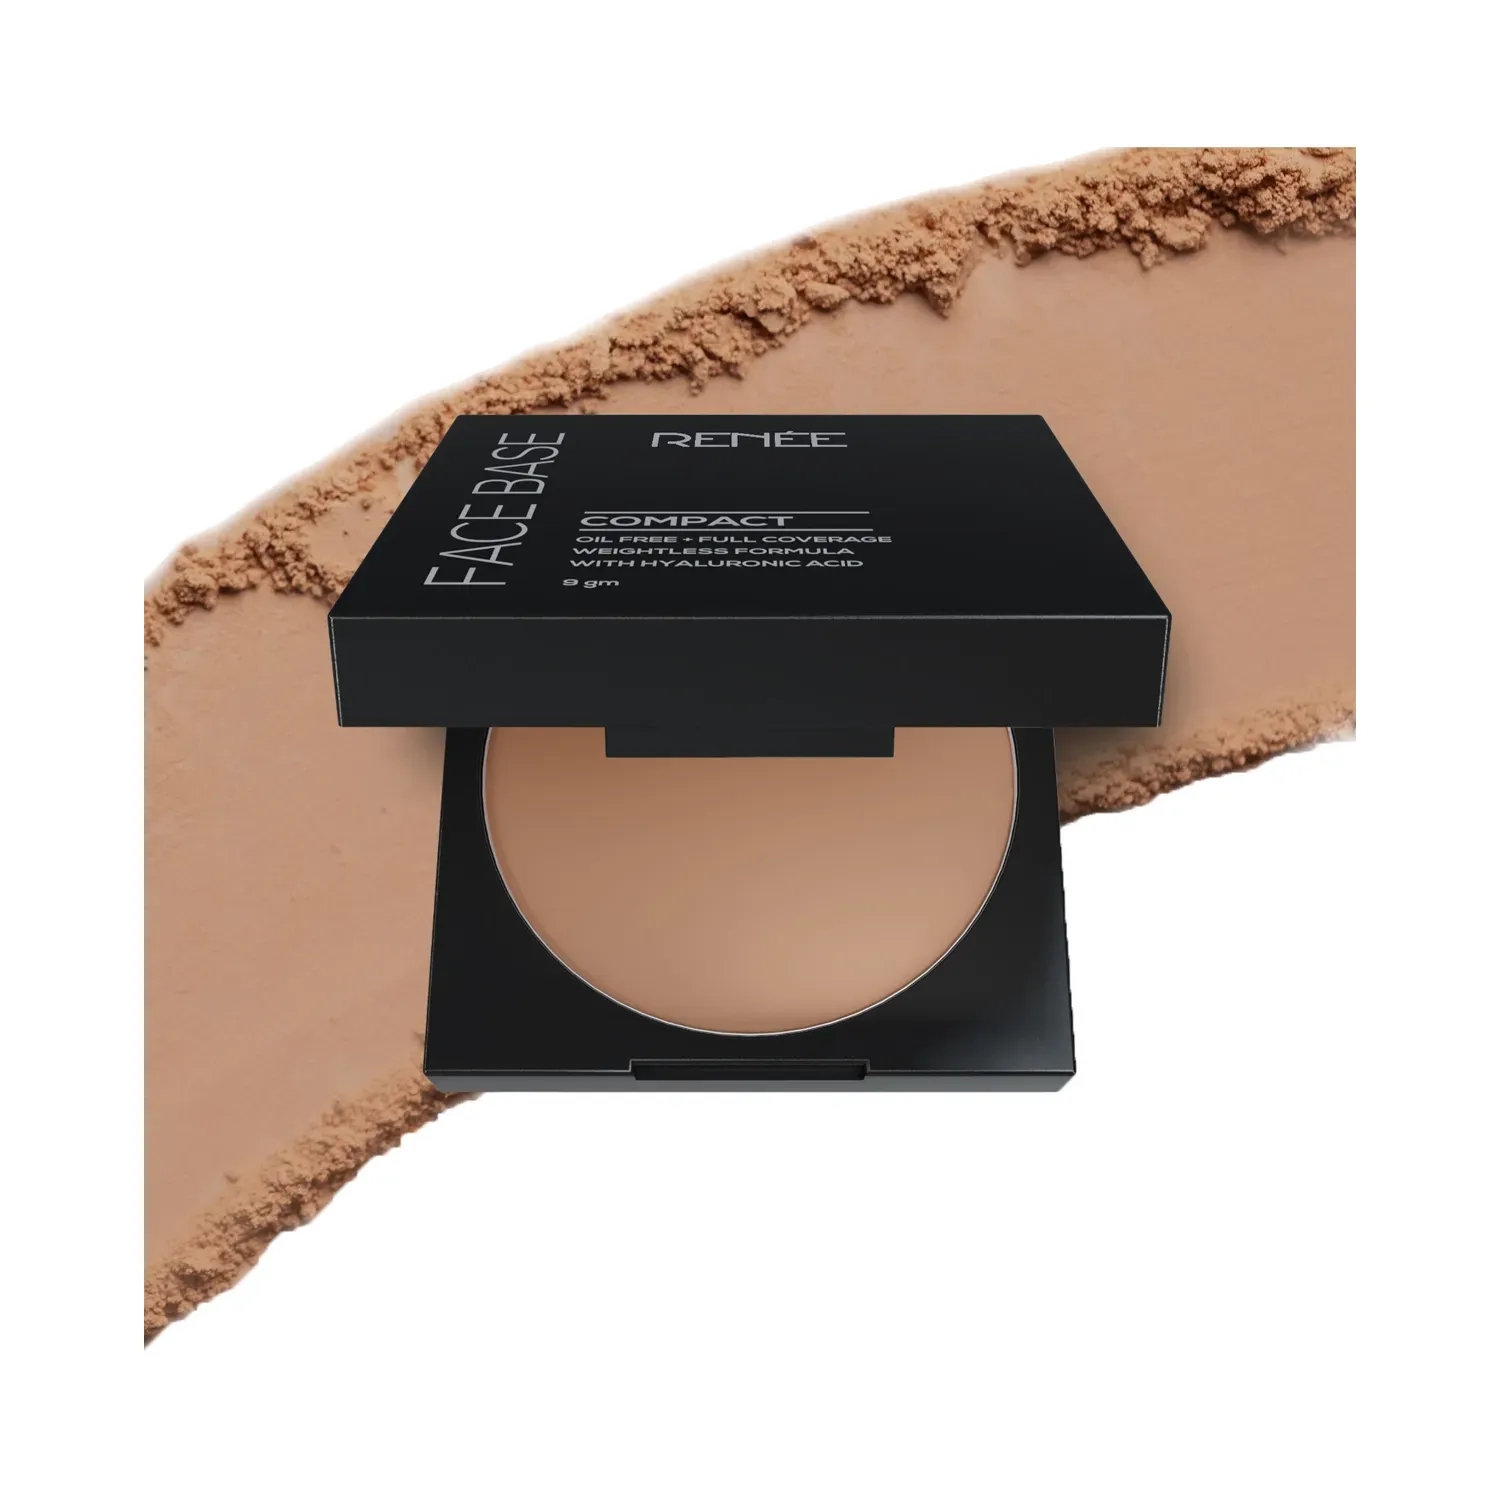 RENEE Face Base Compact - Almond Beige (9g)